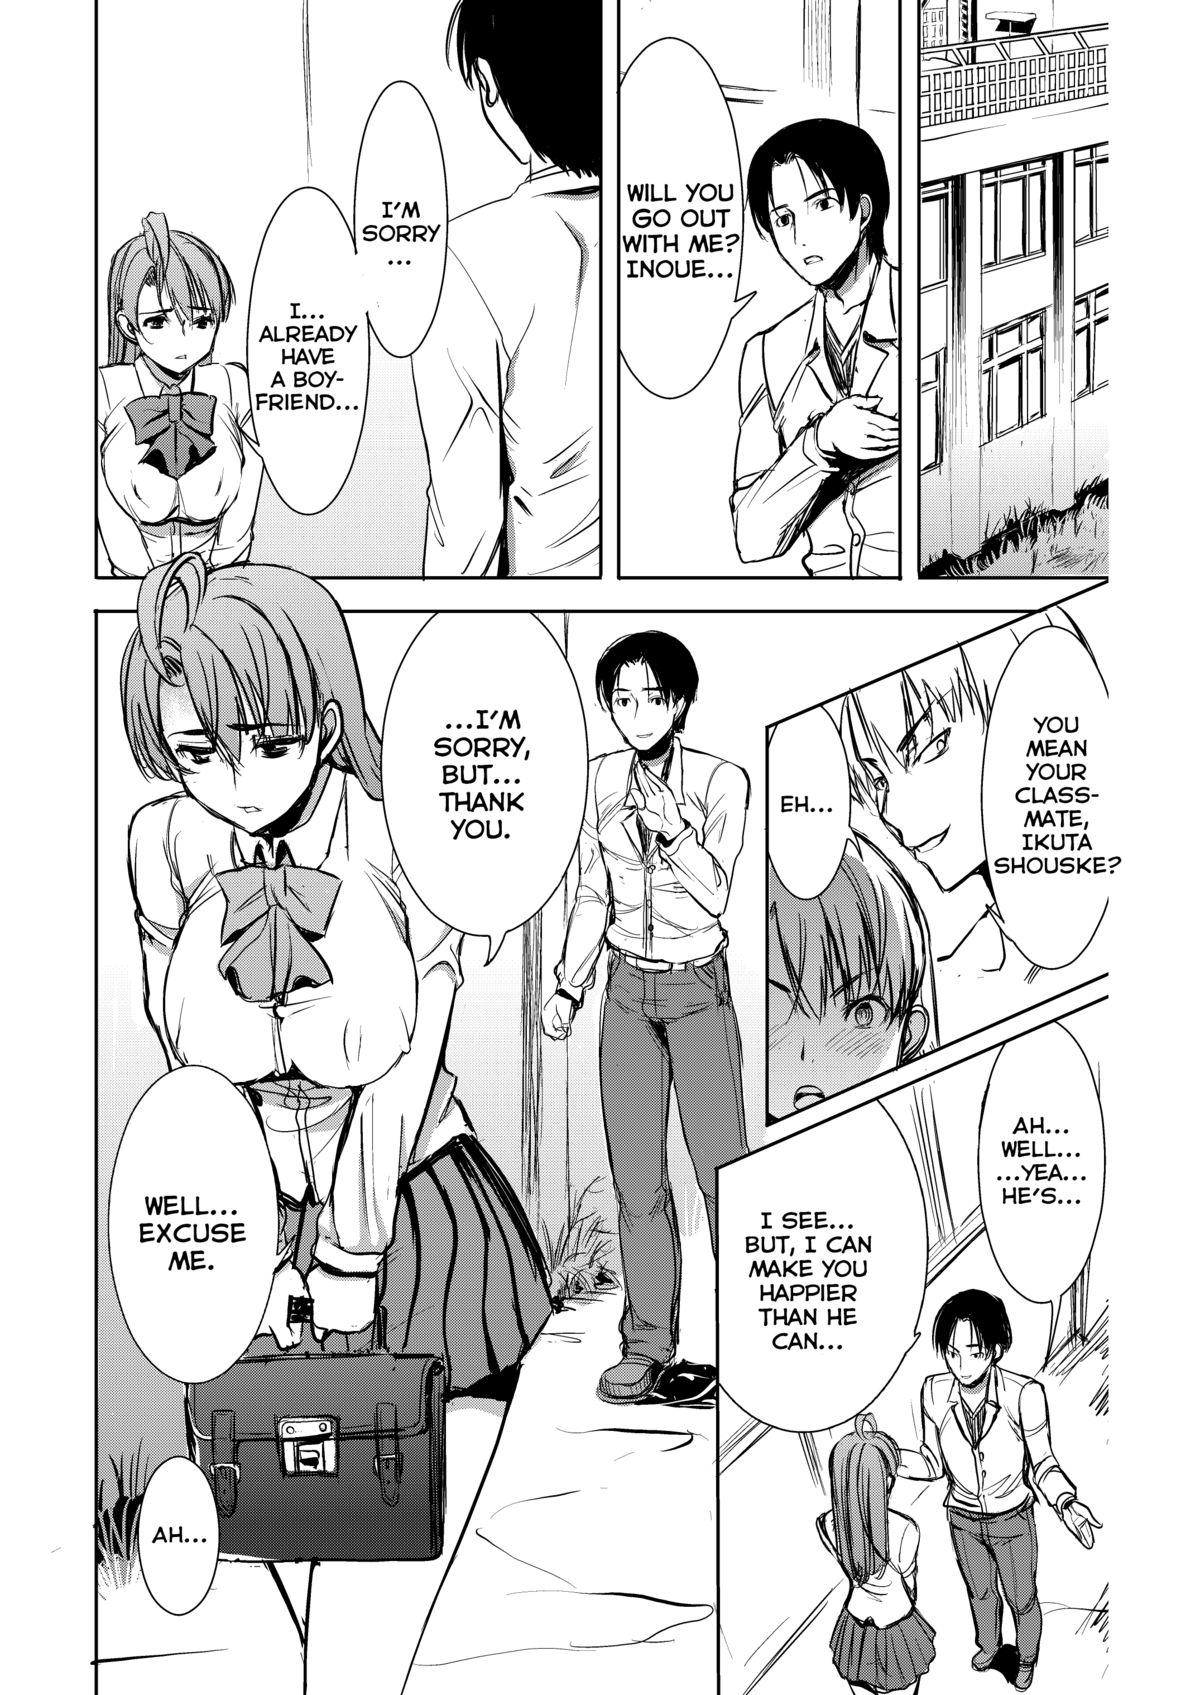 [Tanaka Aji] UnSweet Inoue Ai + (Plus) 2 Tainted by the guy I hate...  I have to hate it... Digital ver. vol.2 [English] 36